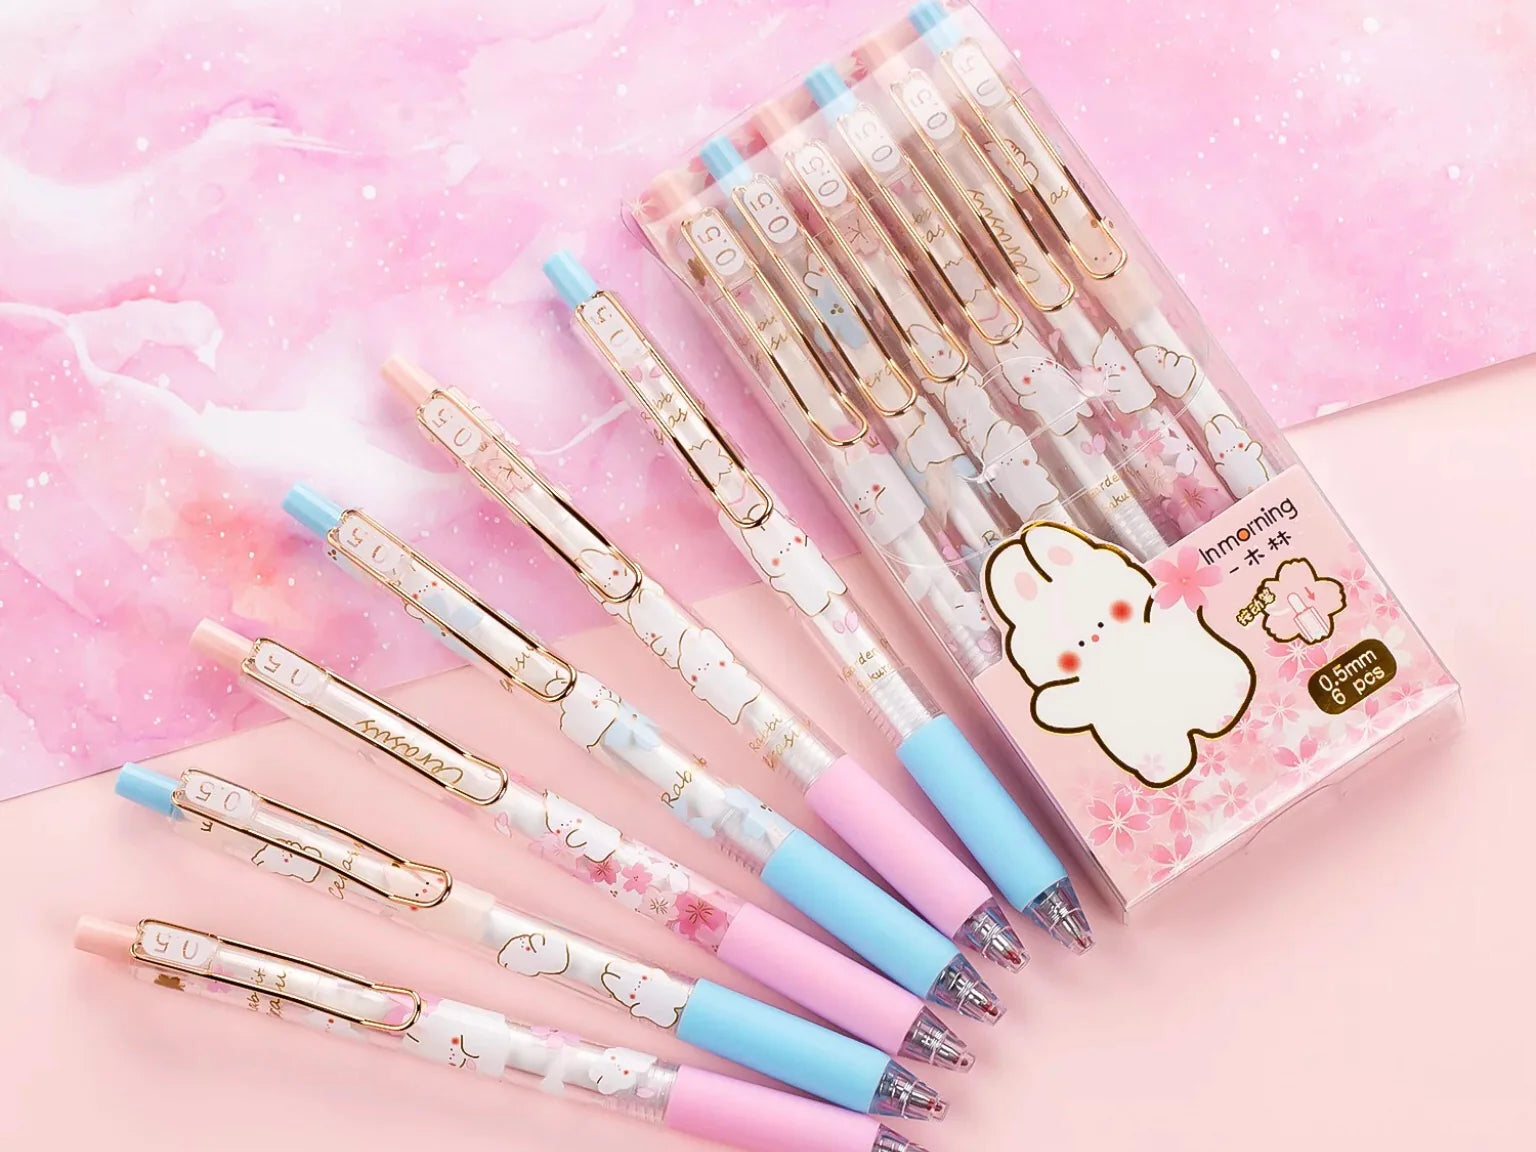 6Pcs Cute Candy Color Kawaii Highlighters Inks Stamp Pen Creative